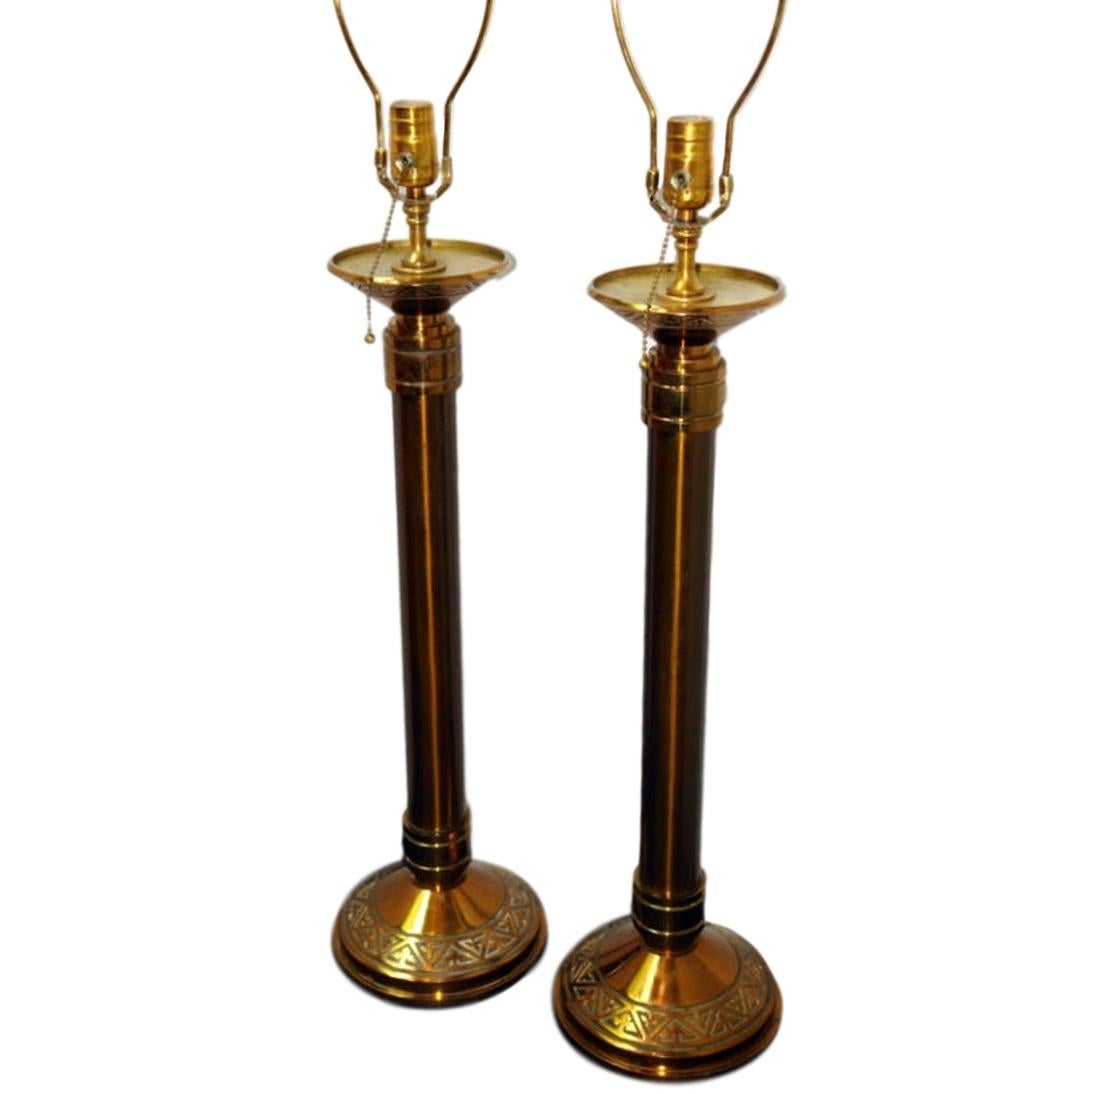 Set of four circa 1900 French candlesticks mounted as lamps with original gilt finish. Sold in pairs.

Measurements:
Height of body: 26